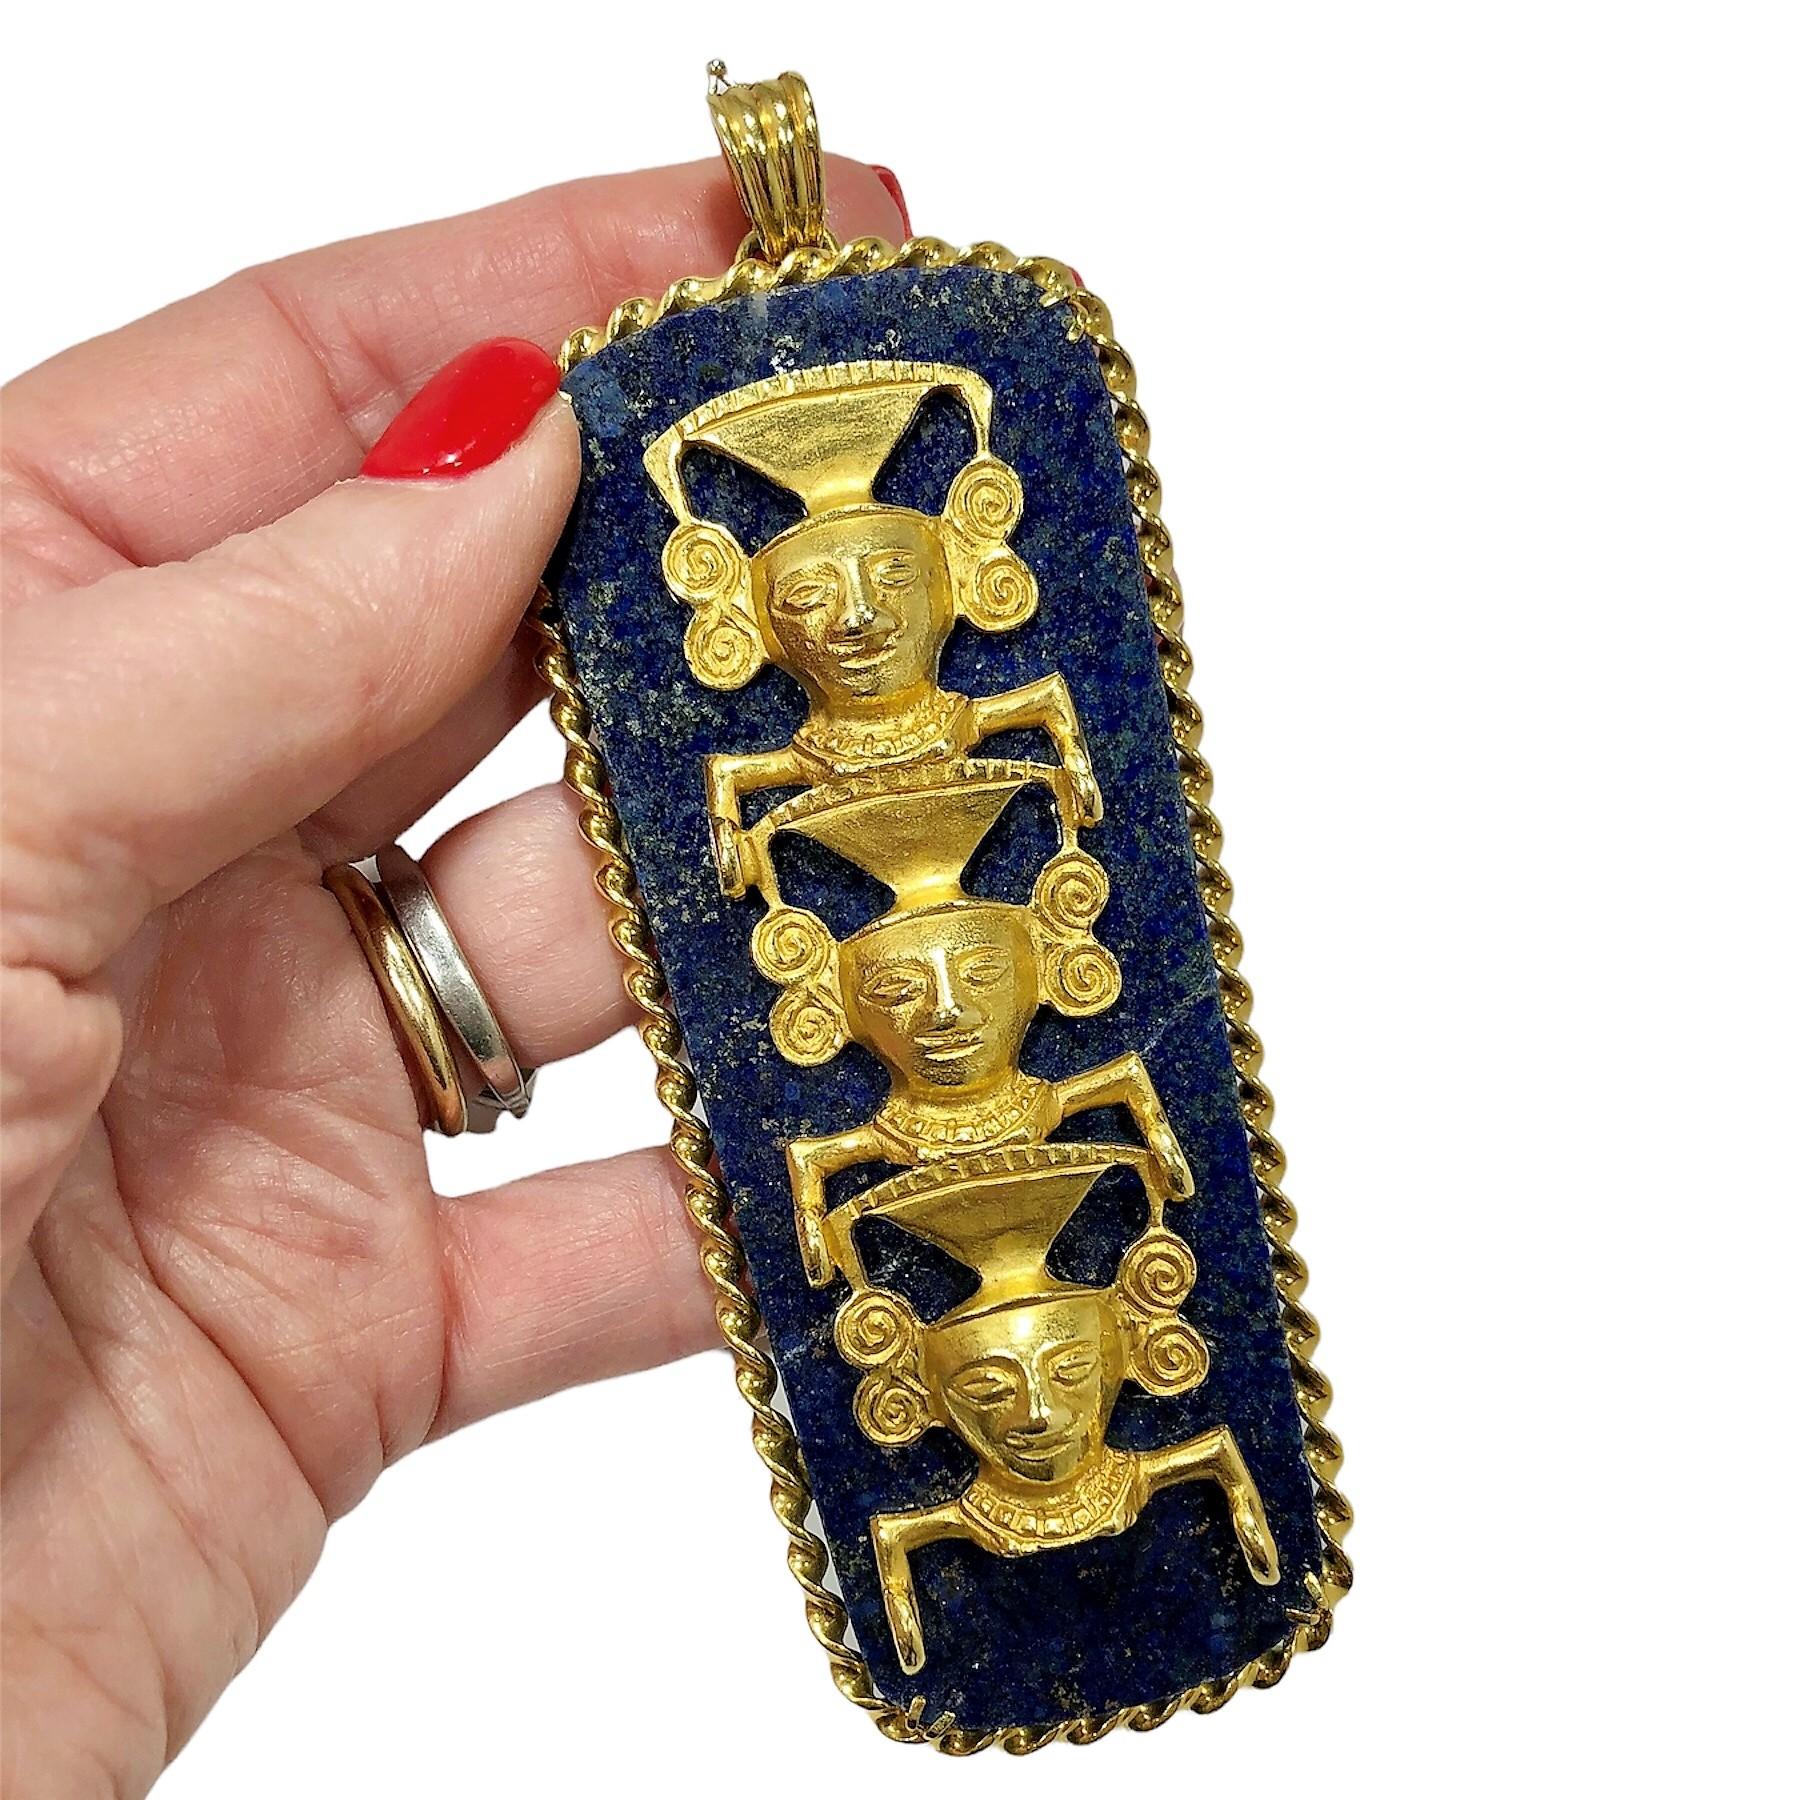 This wonderful and fanciful Totem pendant was crafted from an enormous slab of Lapis-Lazuli with three 18k yellow gold Pre-Colombian images stacked, one above the other. The slab itself is framed entirely by hand twisted 18k gold wire terminating on